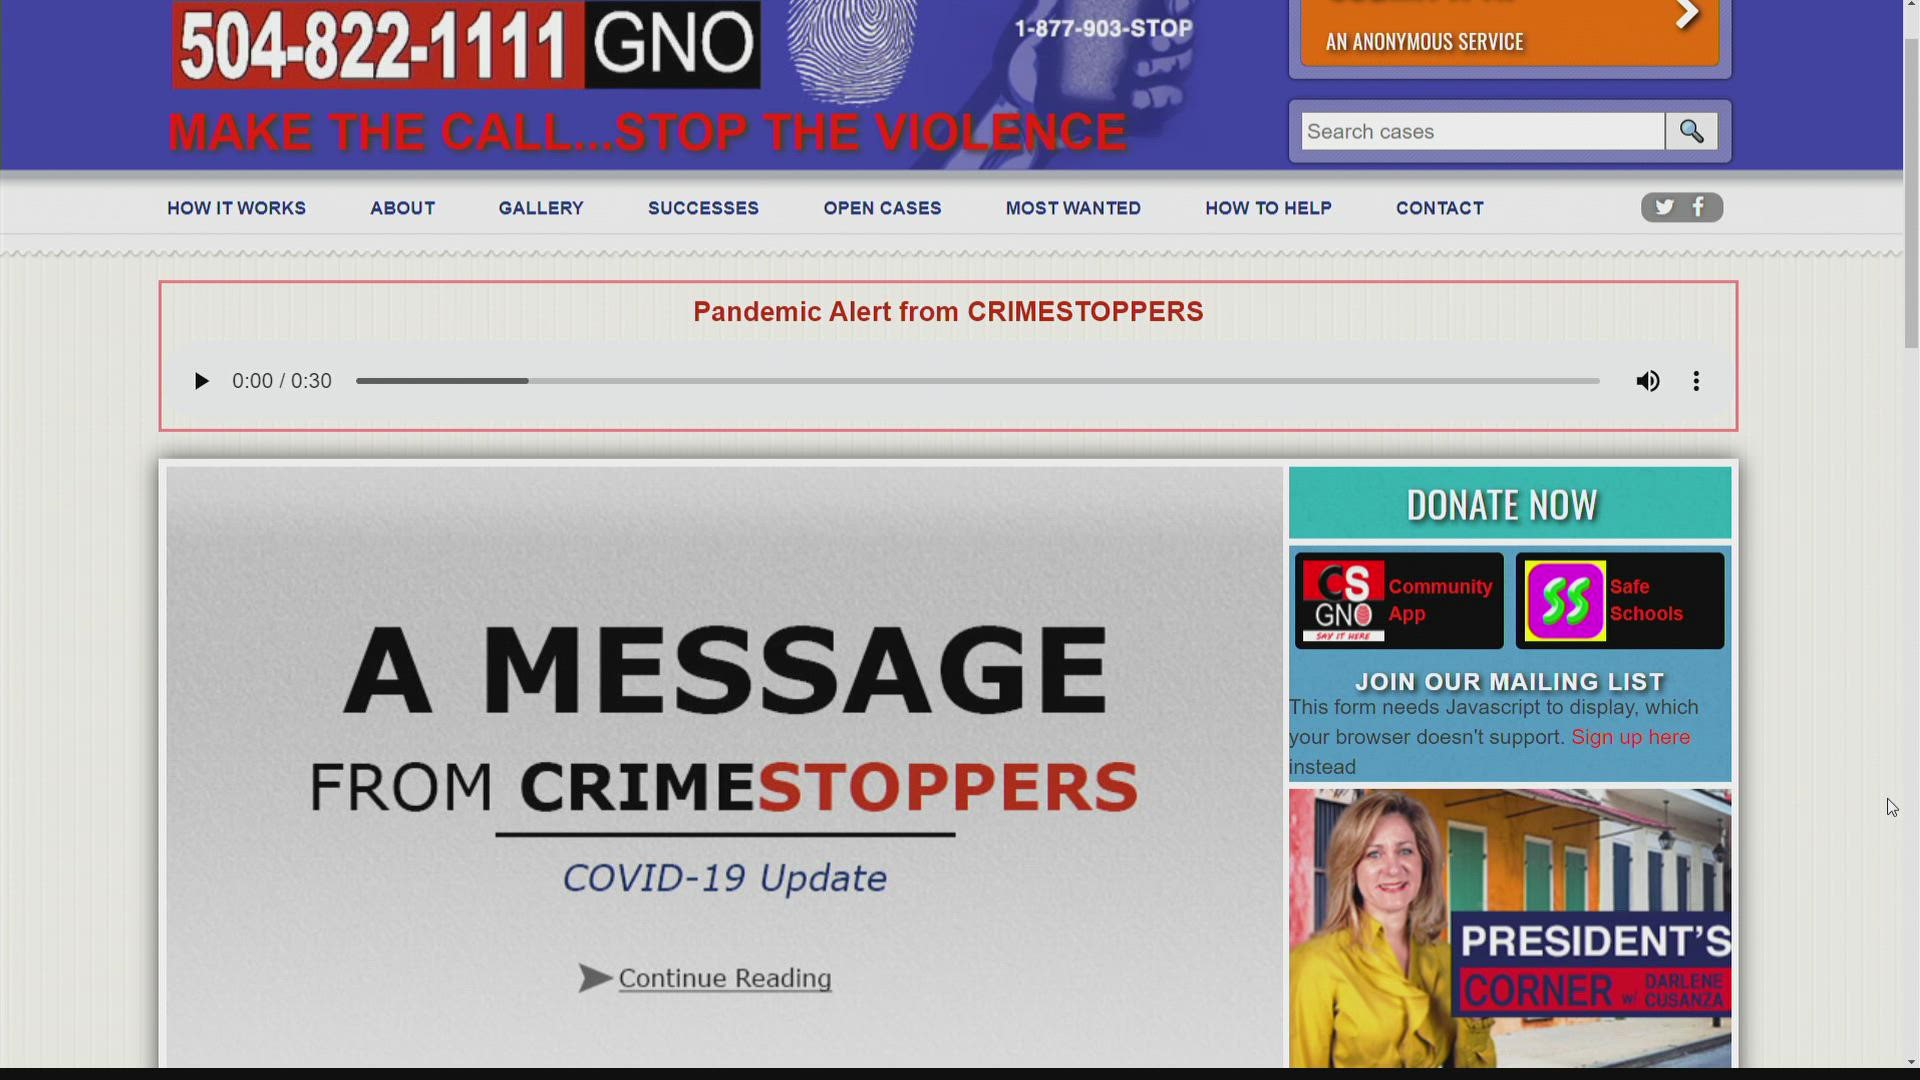 You can reach Crimestoppers by calling 504-822-1111 , visiting the website at www.crimestoppersgno.org , or downloading the mobile app